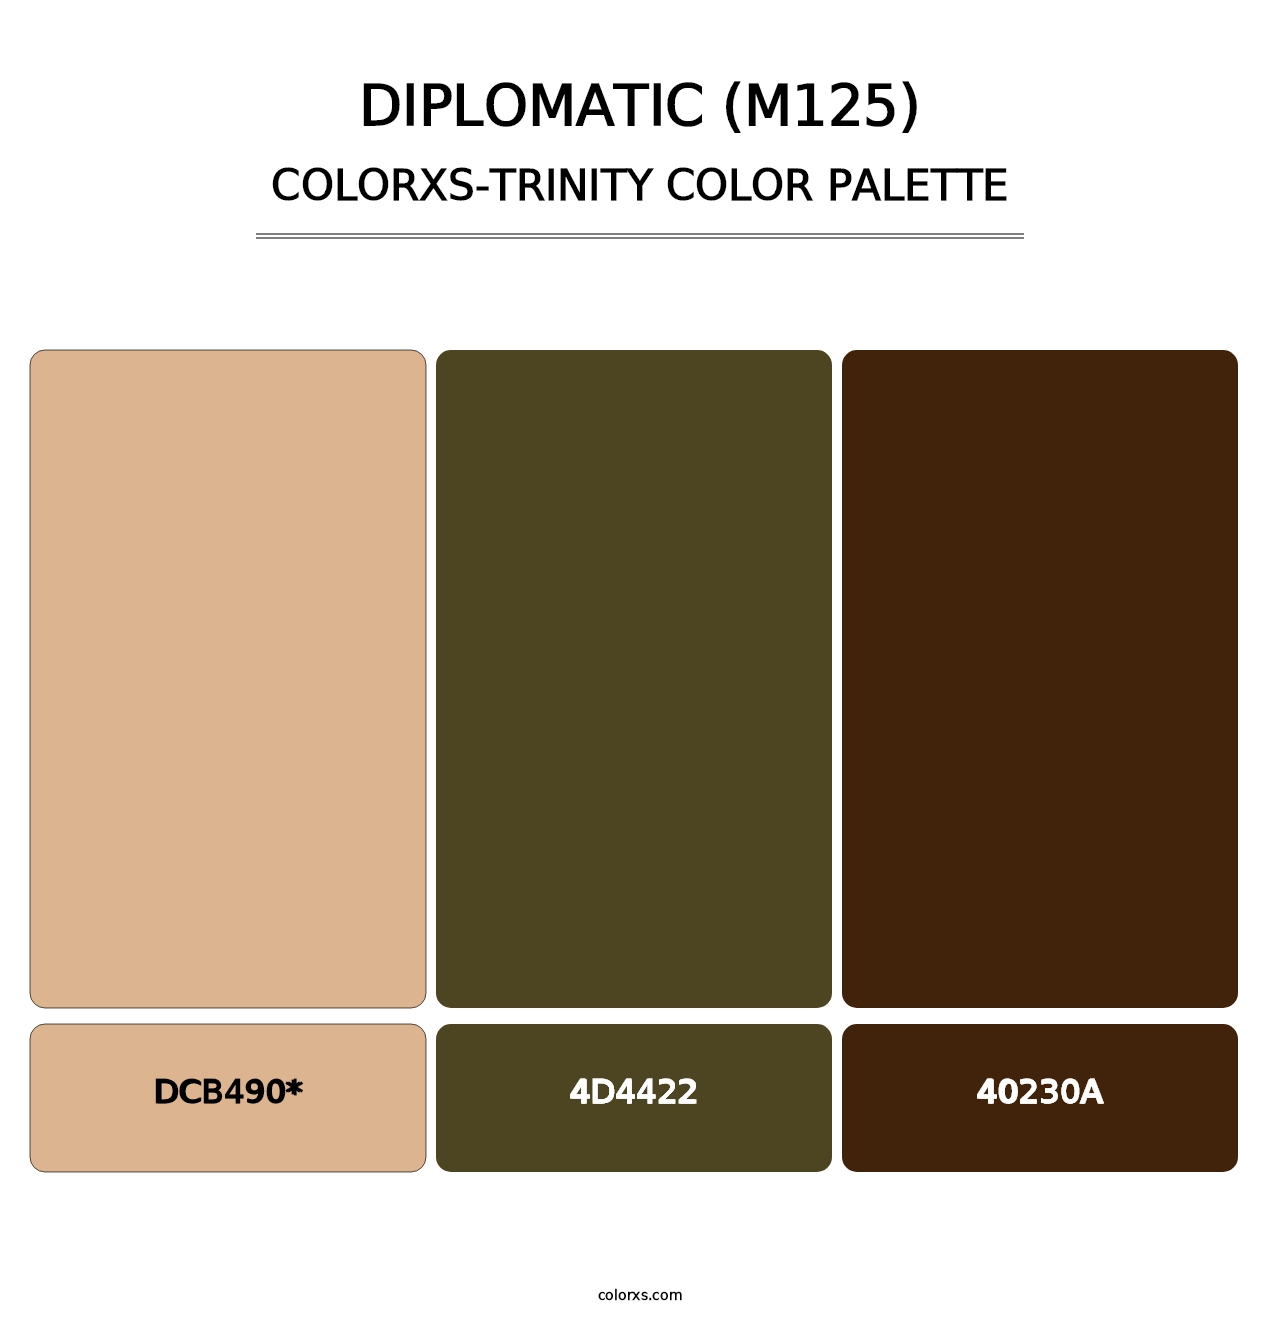 Diplomatic (M125) - Colorxs Trinity Palette